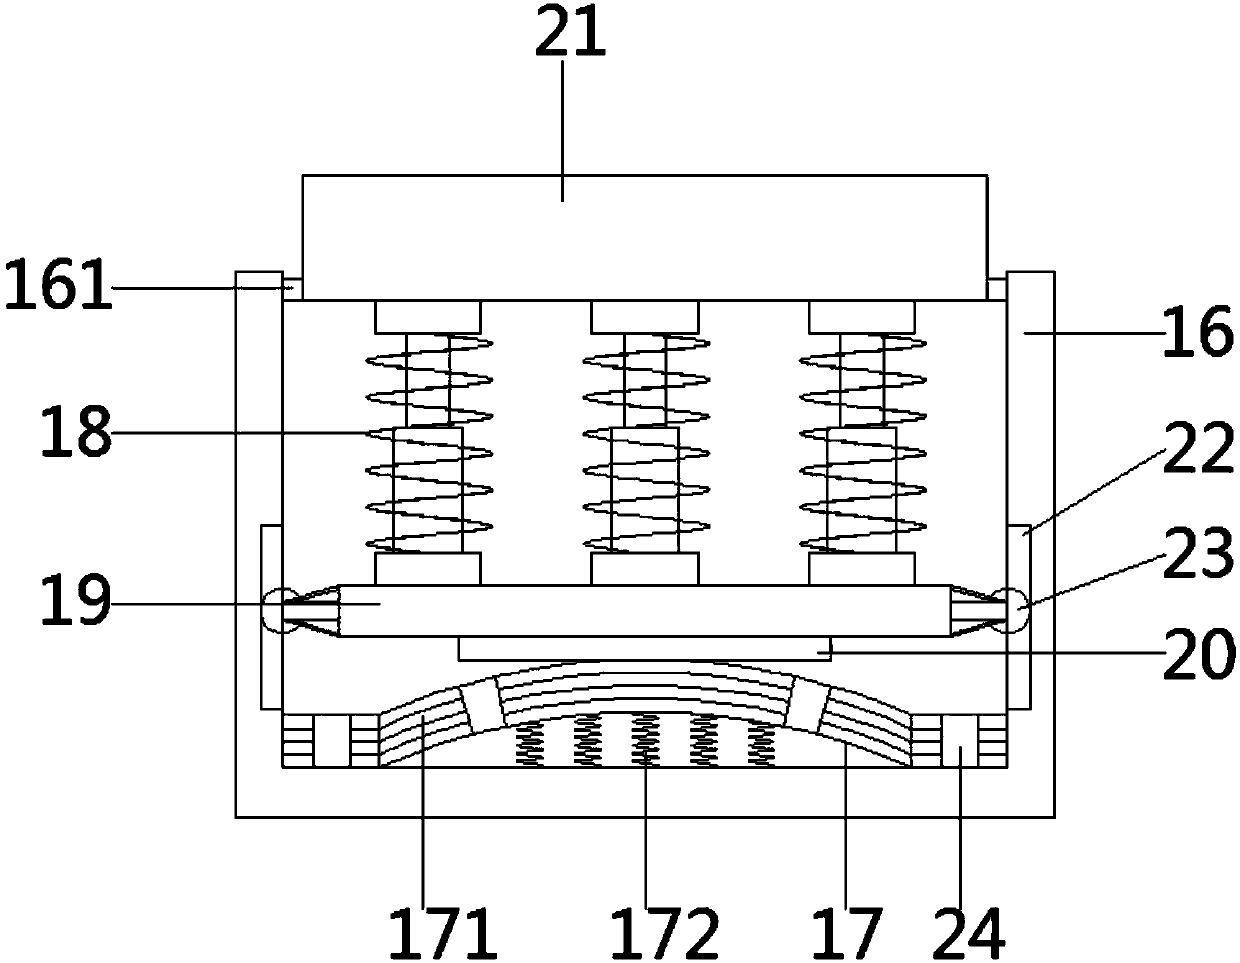 Self-feeding and mixing device used for building production